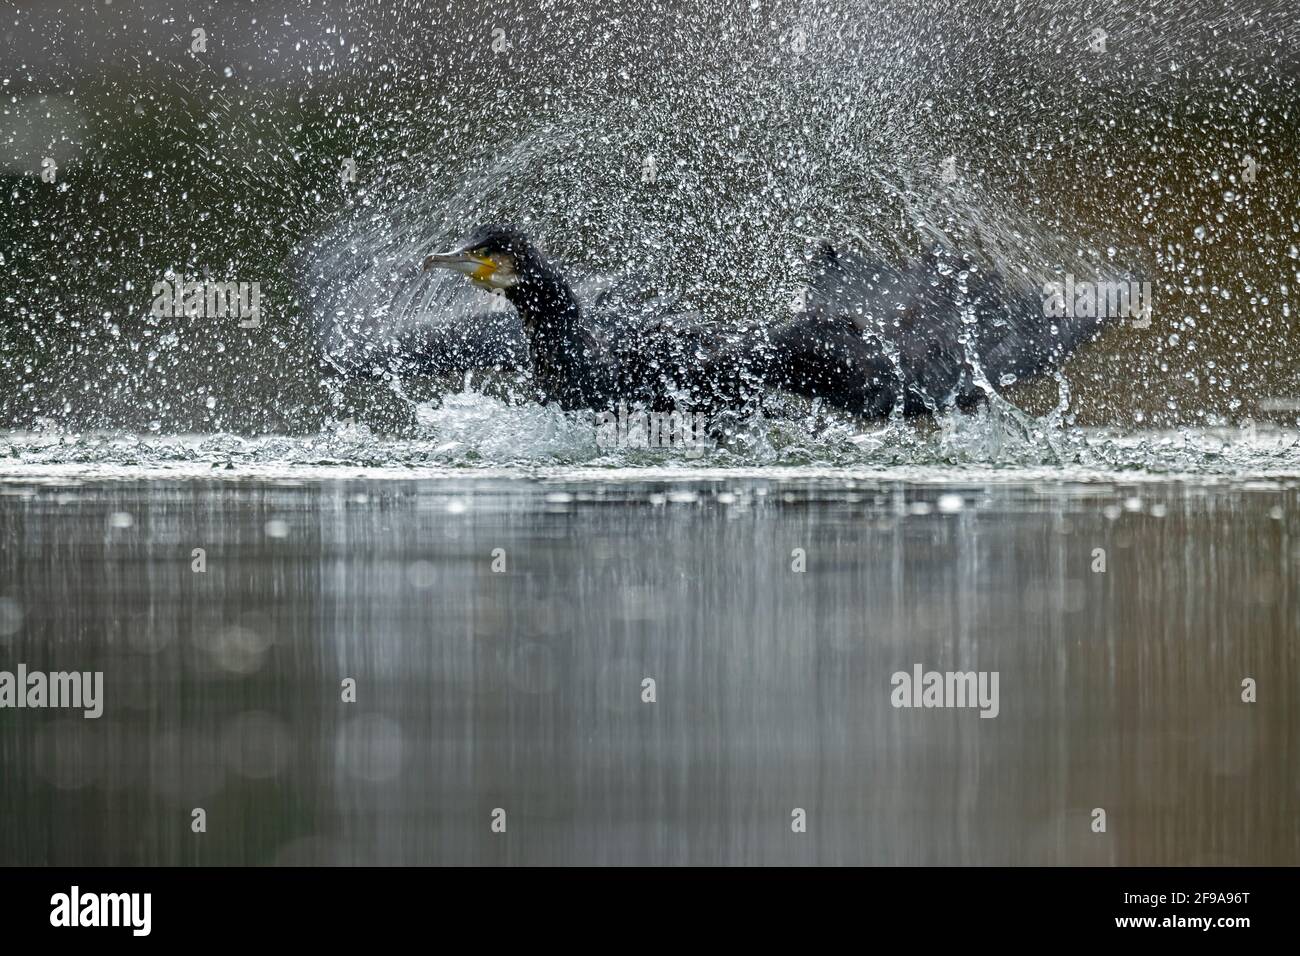 Great cormorant, (Phalacrocorax carbo) in the water, Germany Stock Photo